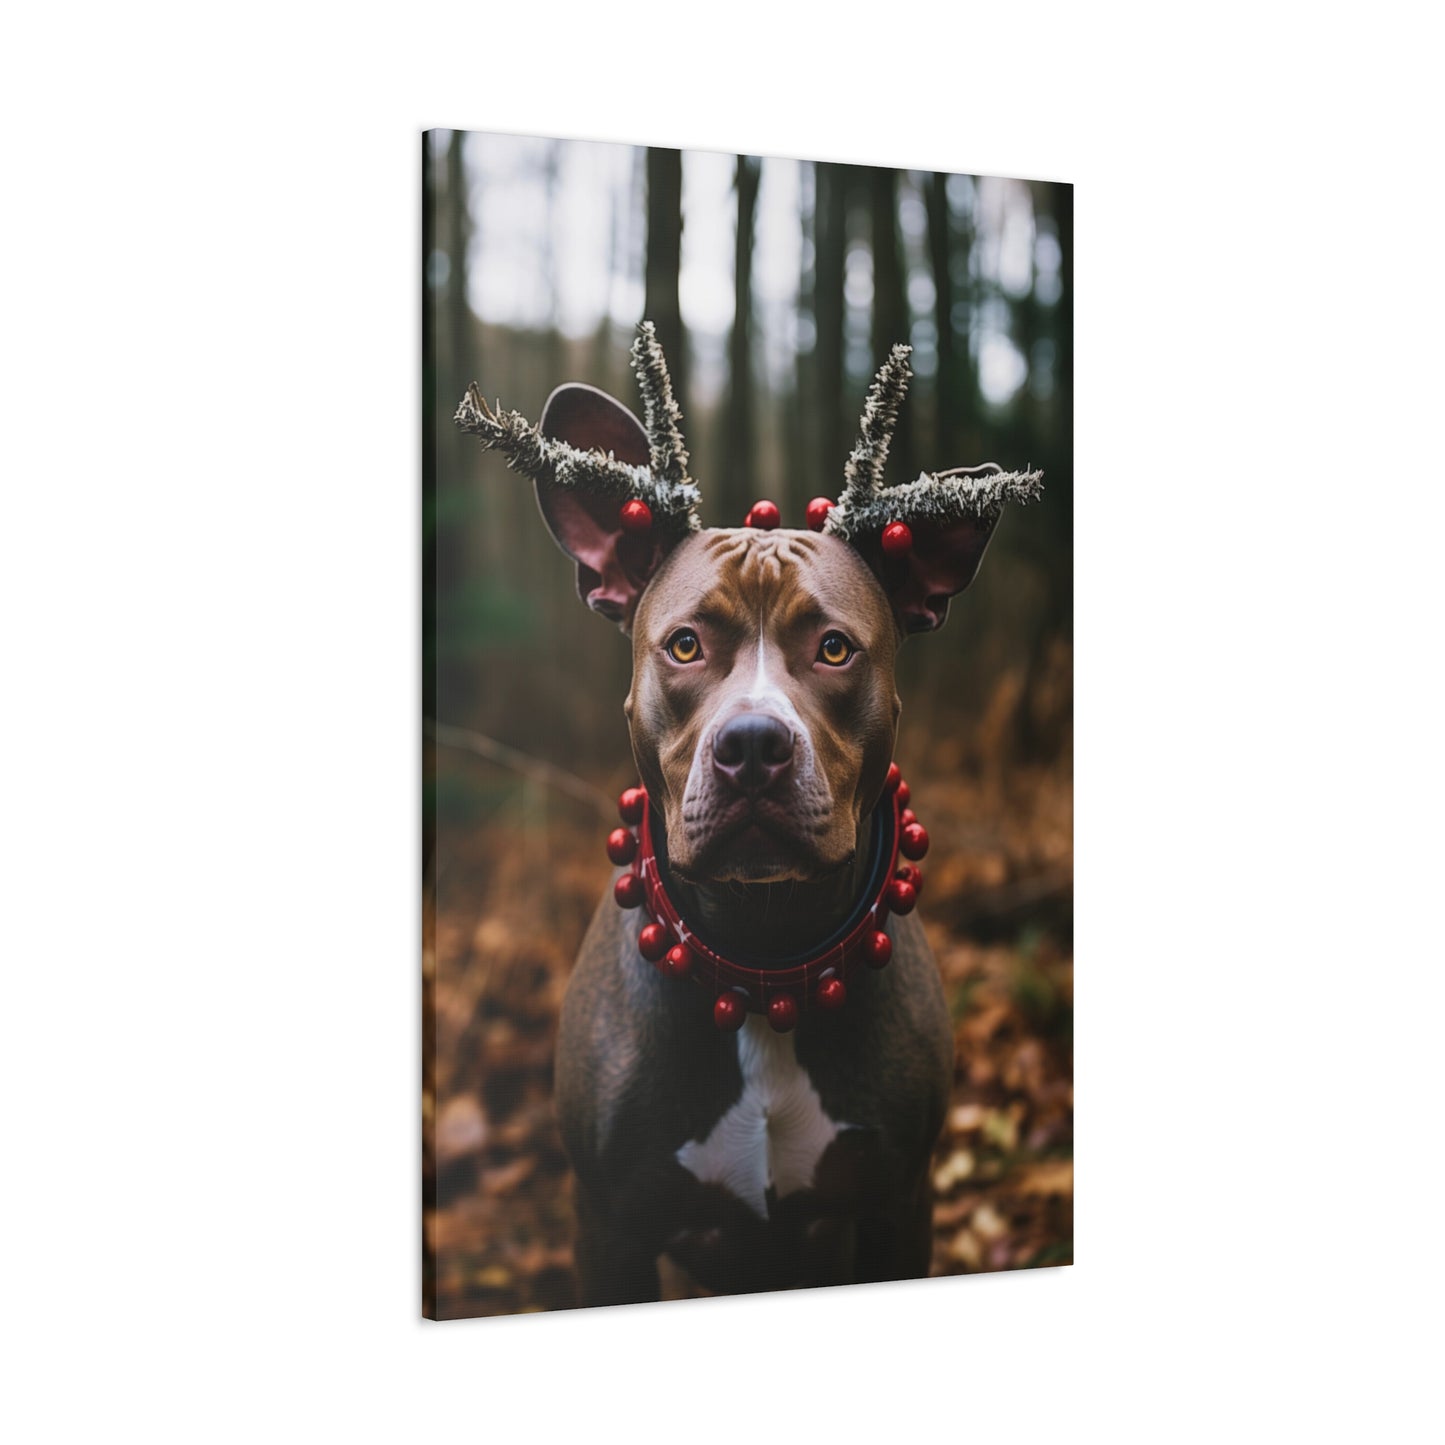 Pit Bull wearing antlers canvas print